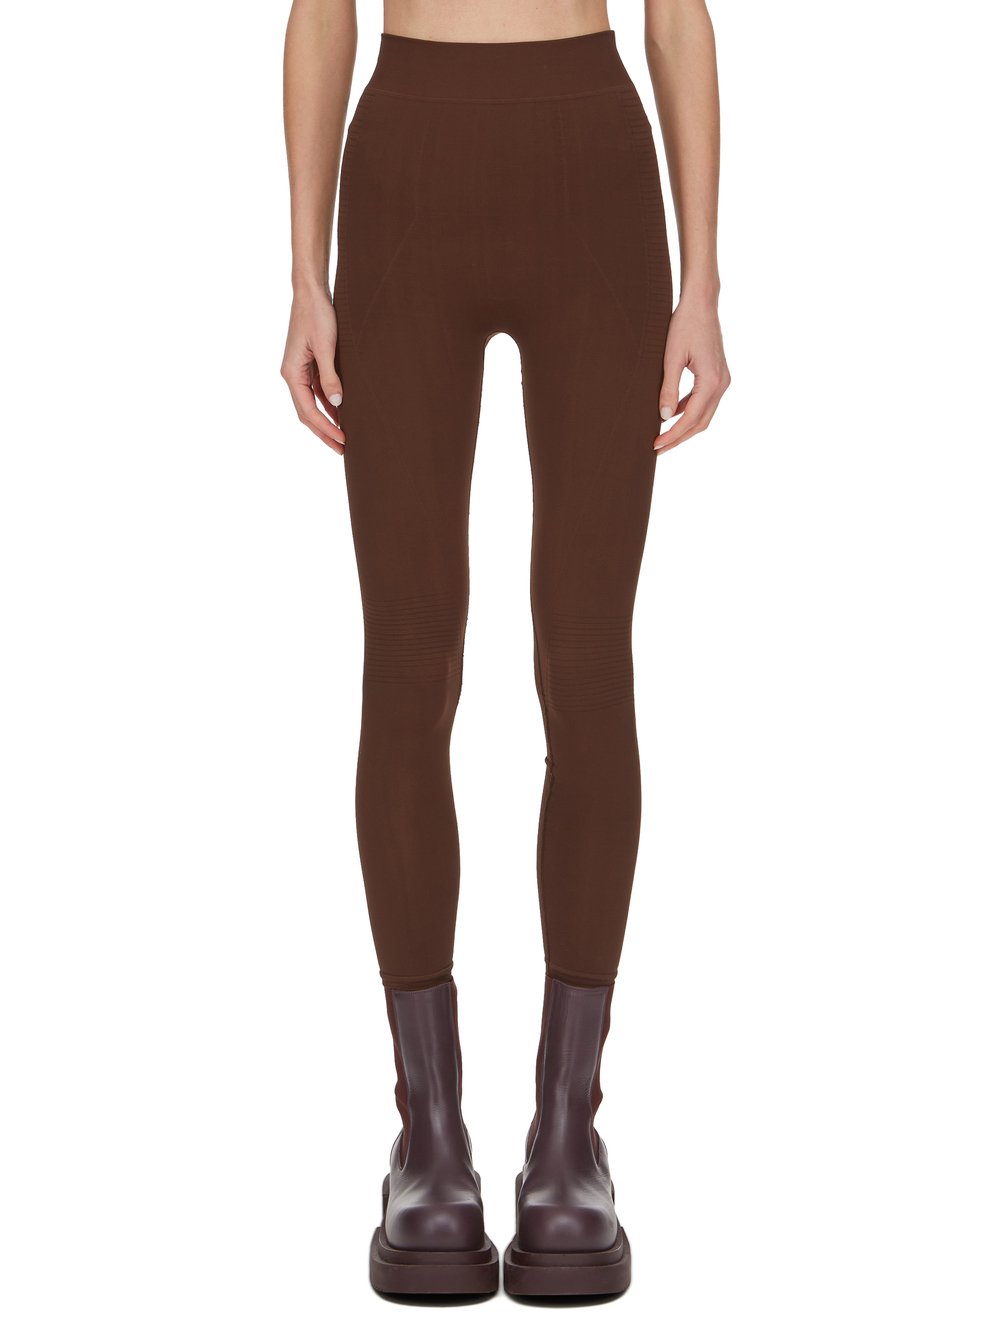 RICK OWENS FW23 LUXOR LEGGINGS IN BROWN ACTIVE KNIT